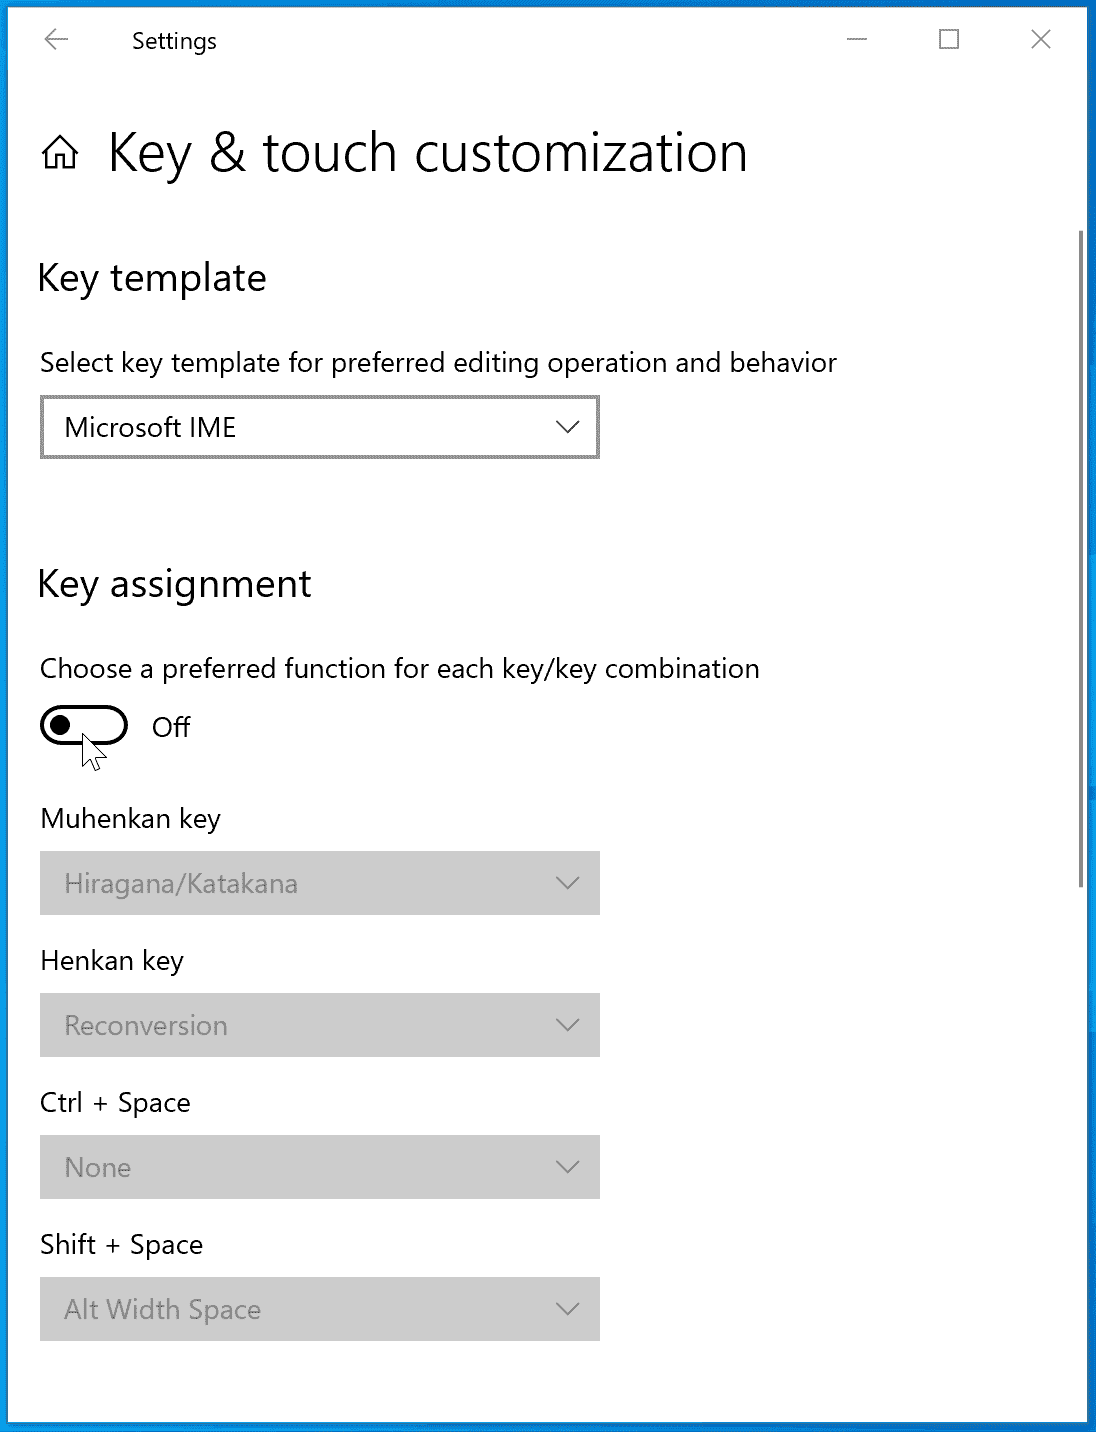 Windows 10 Build 18950 key and touch customization